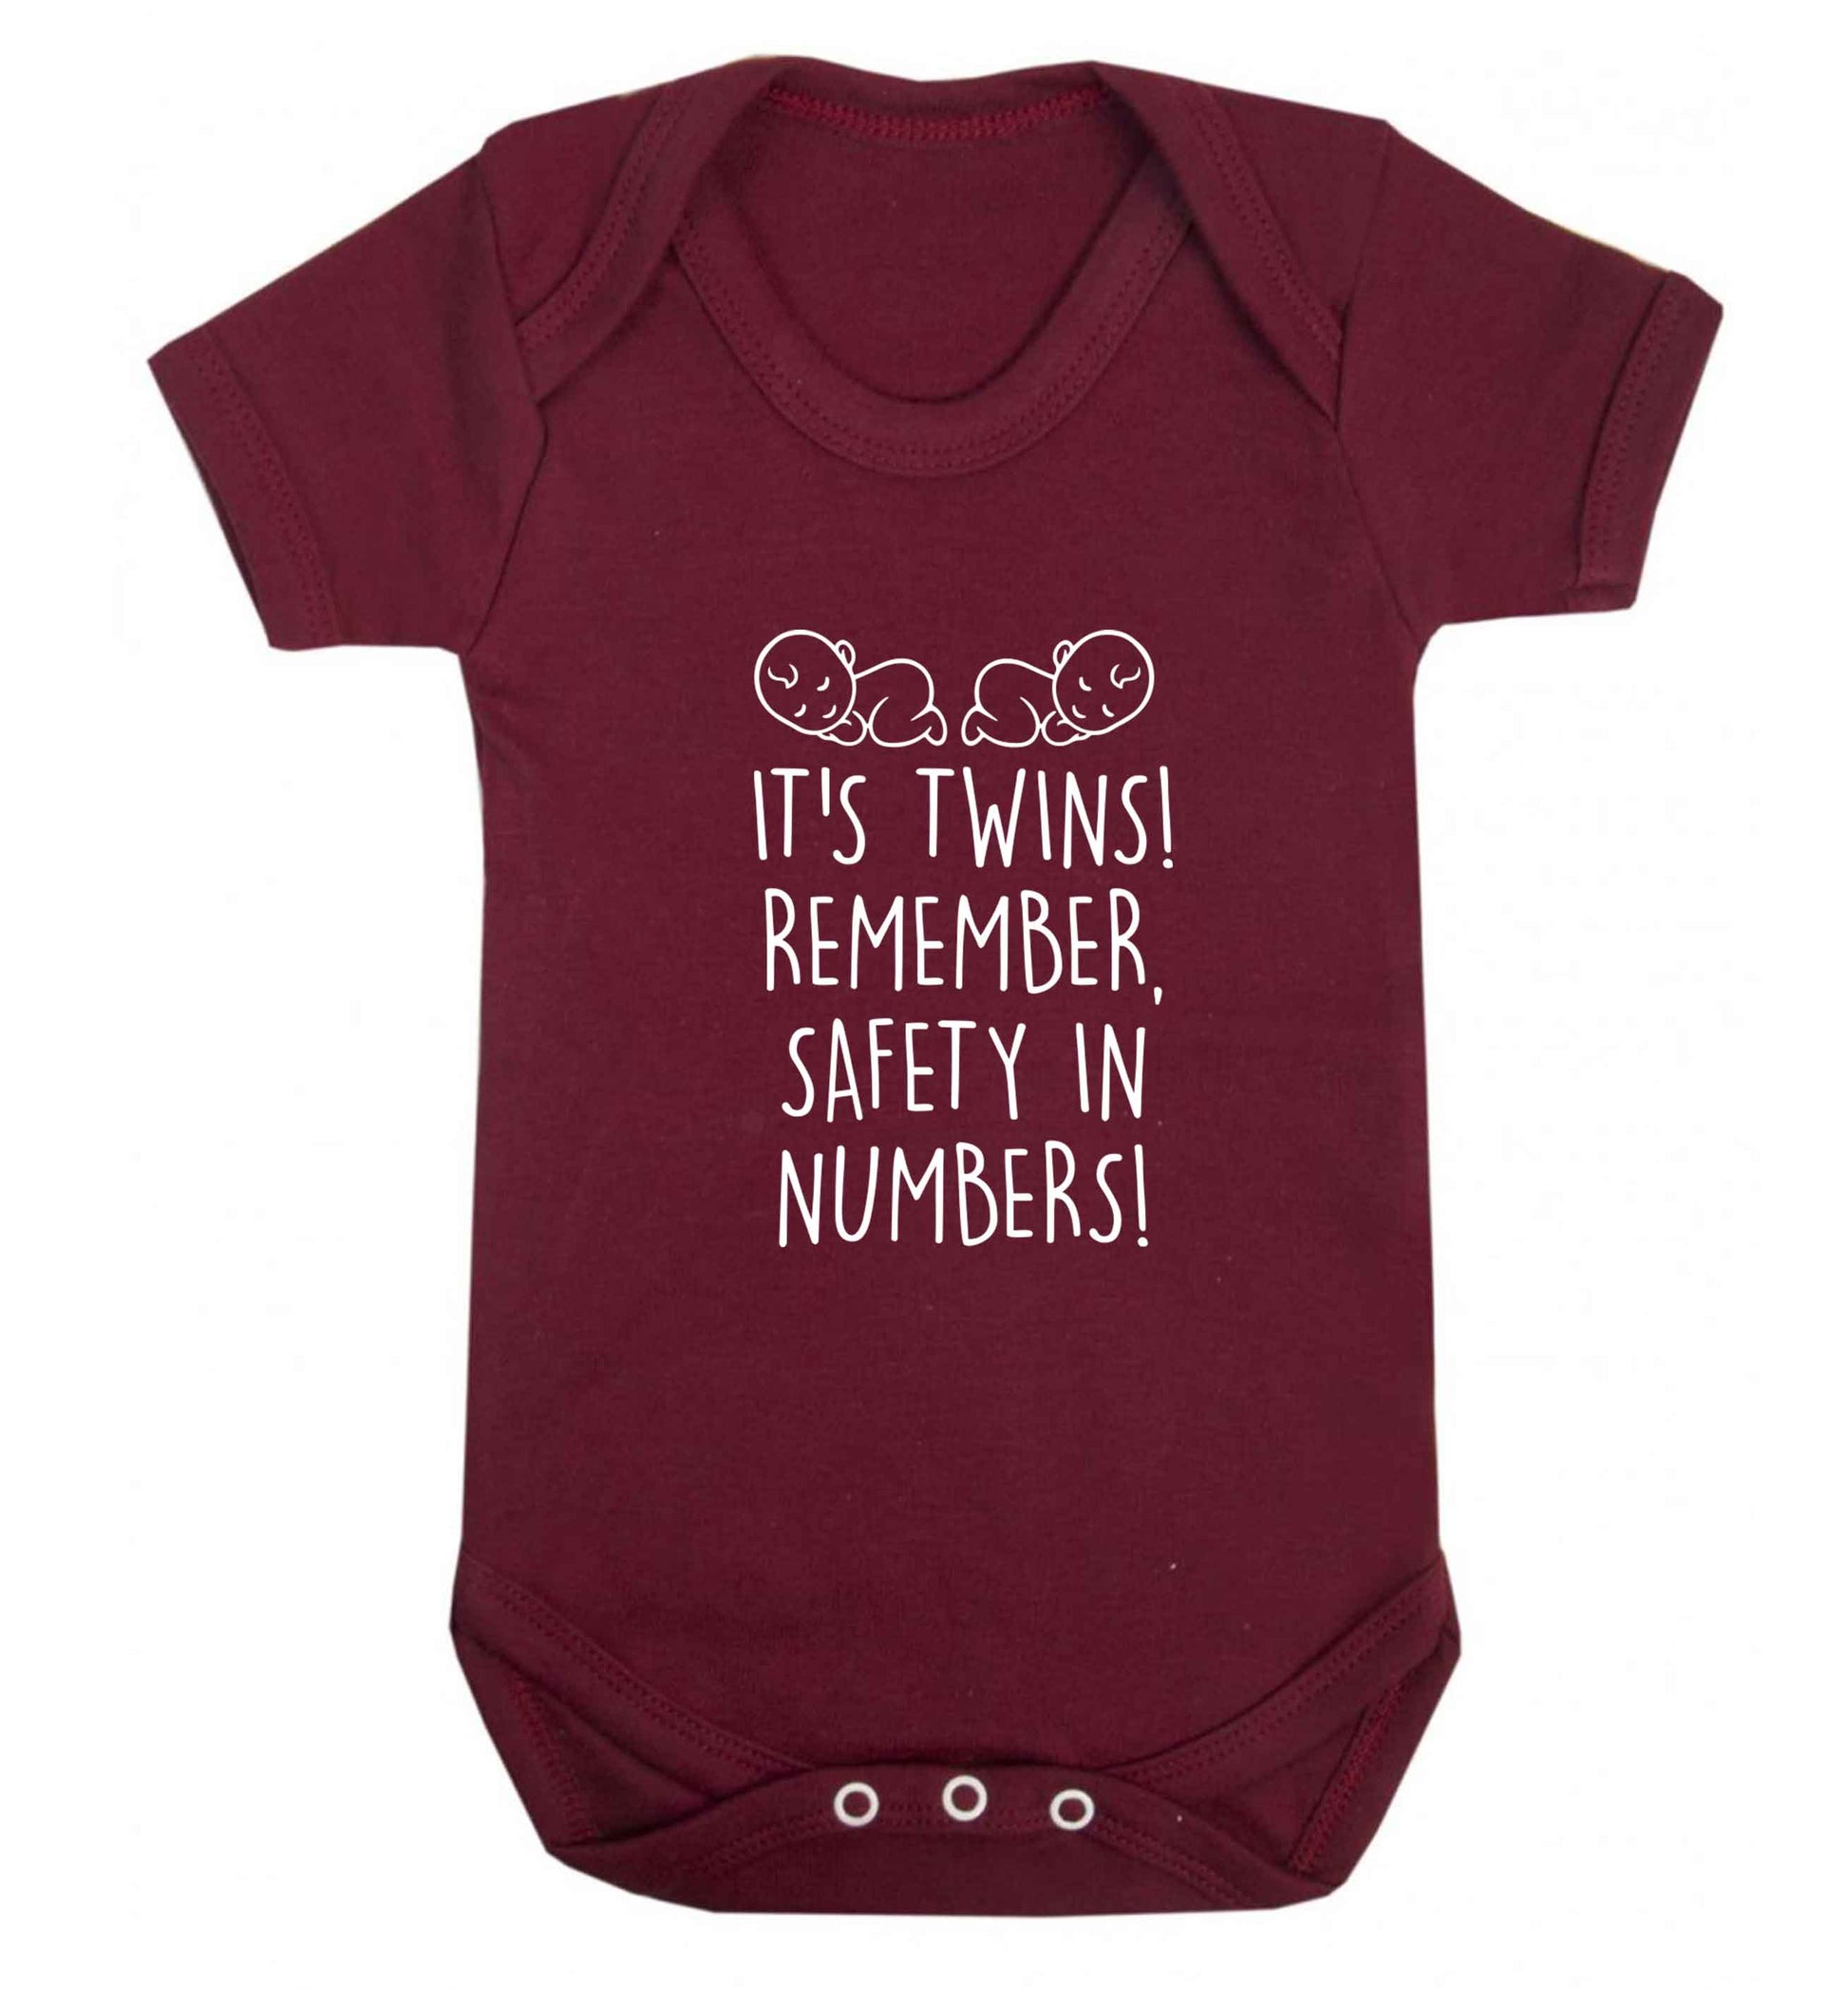 It's twins! Remember safety in numbers! baby vest maroon 18-24 months